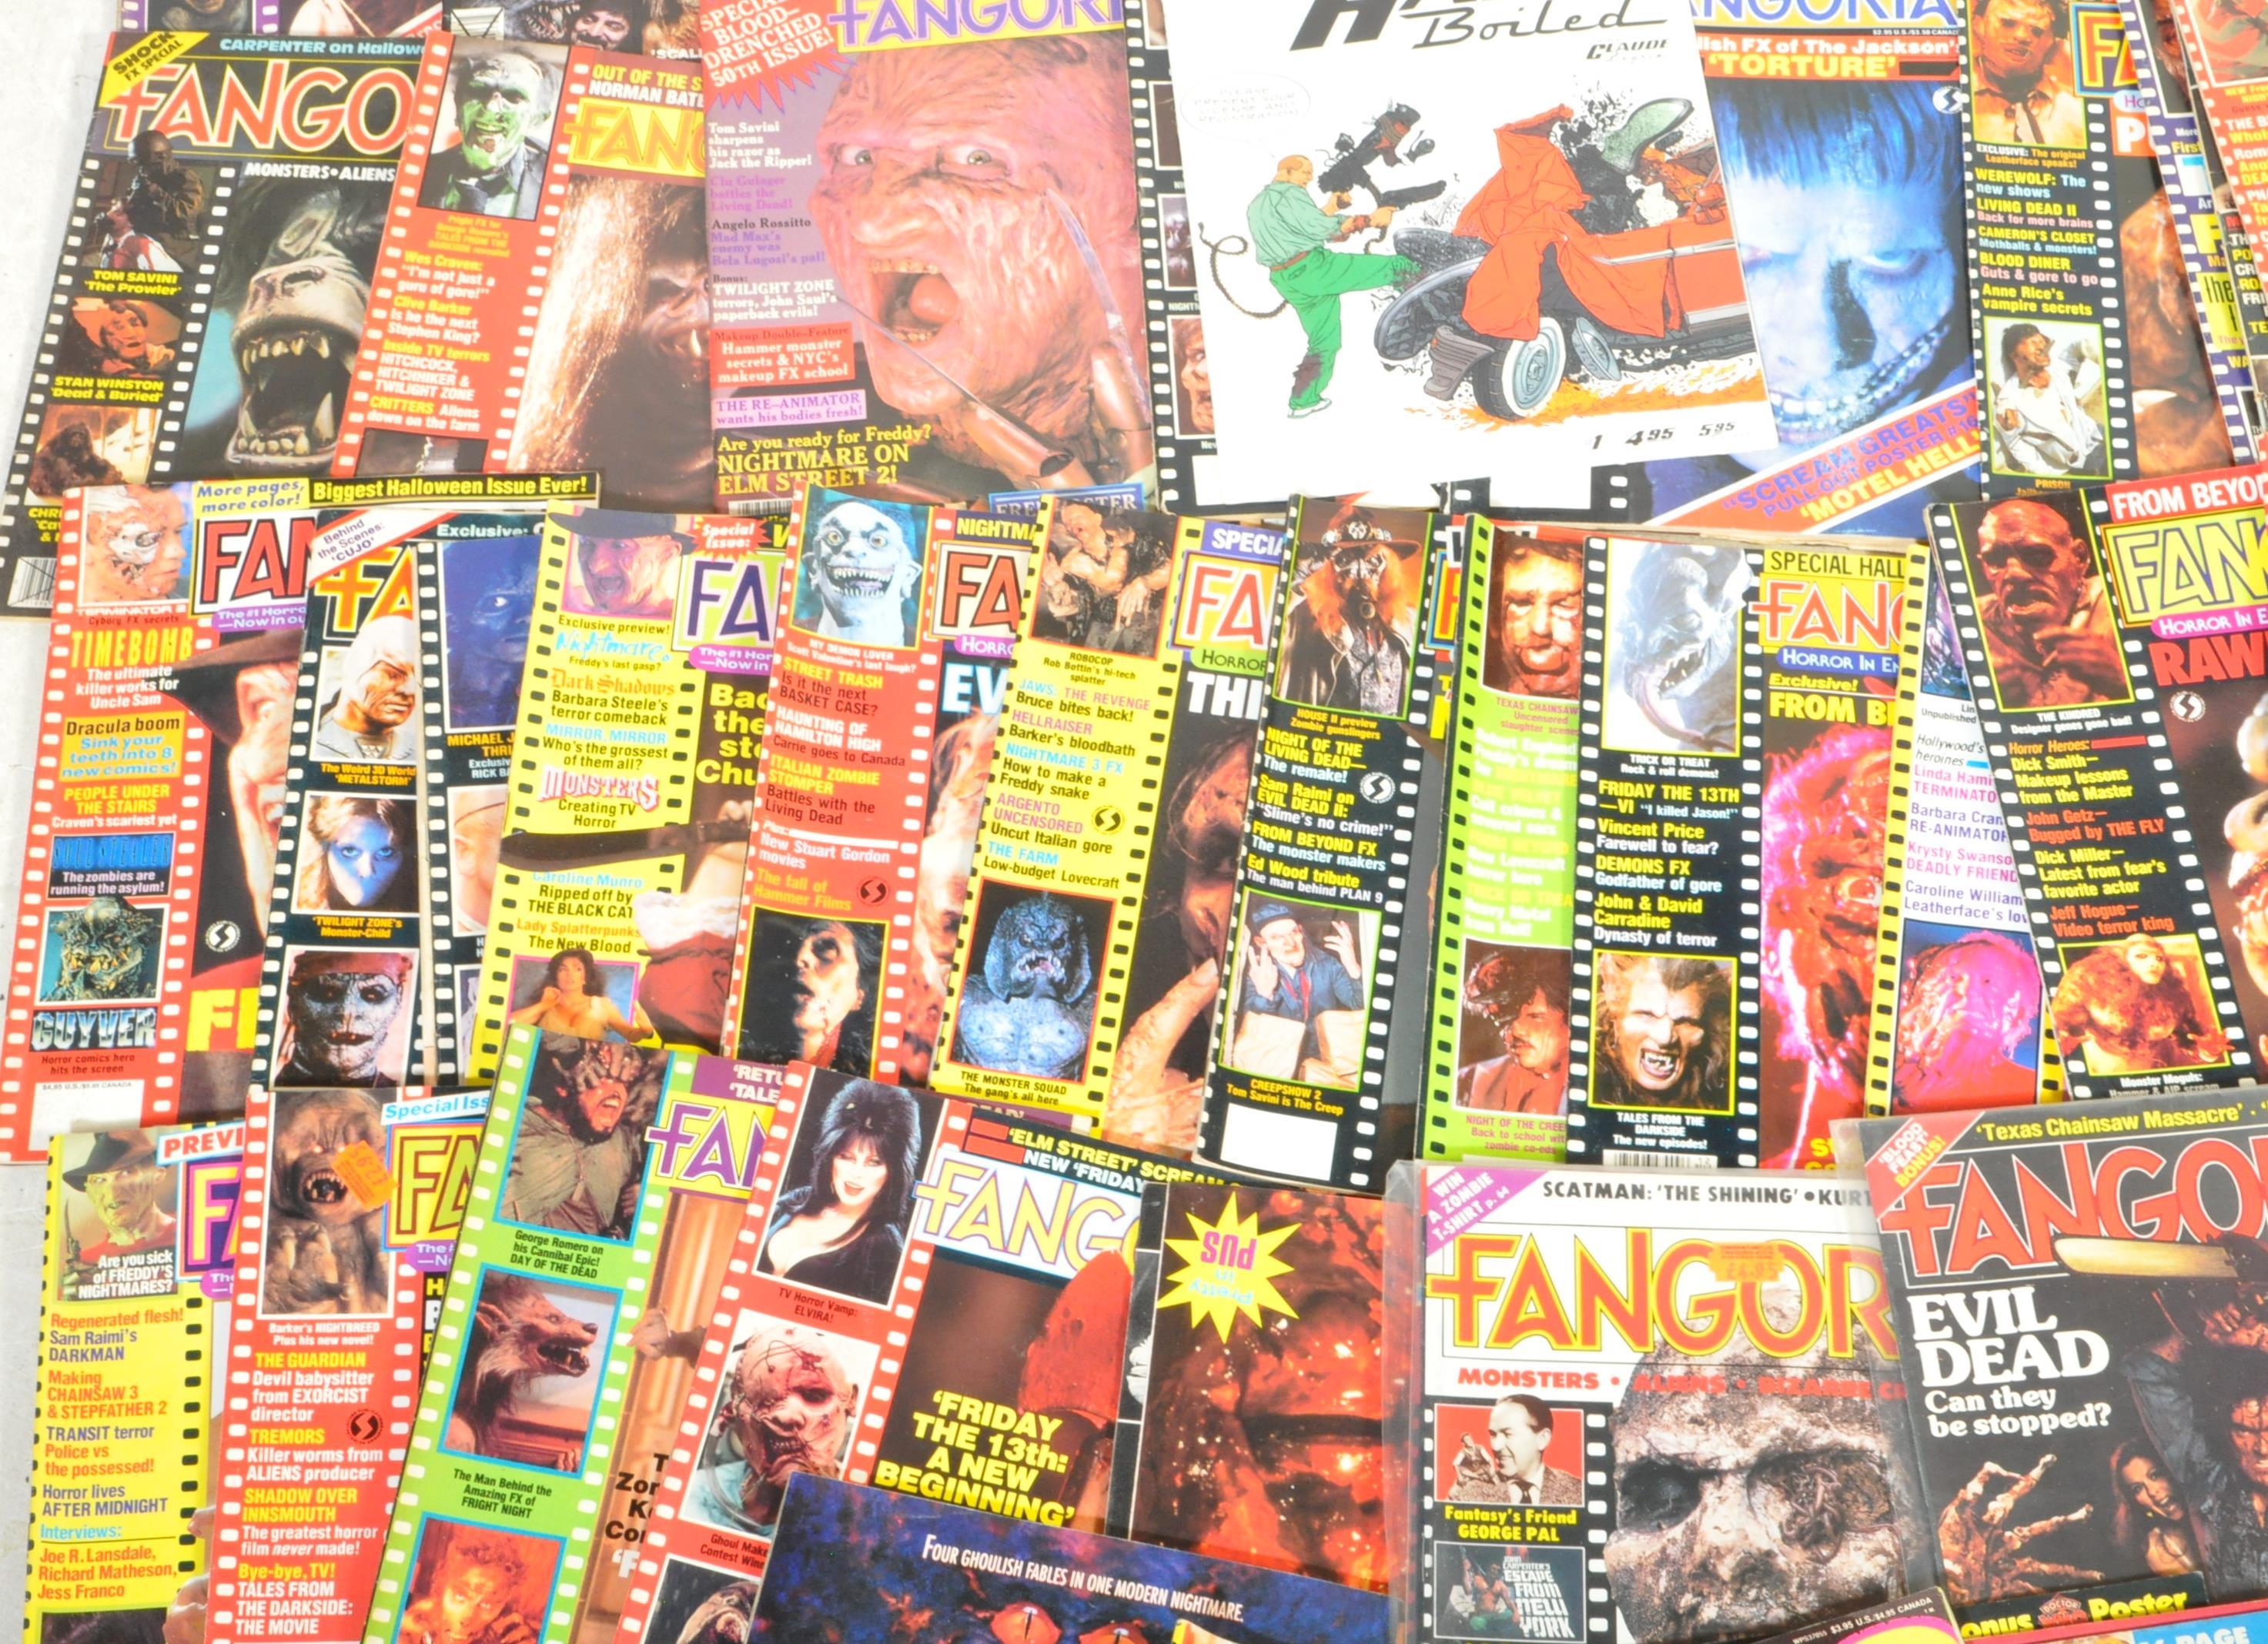 HORROR - COLLECTION OF VINTAGE FANGORIA COMIC BOOKS / MAGAZINES - Image 4 of 7